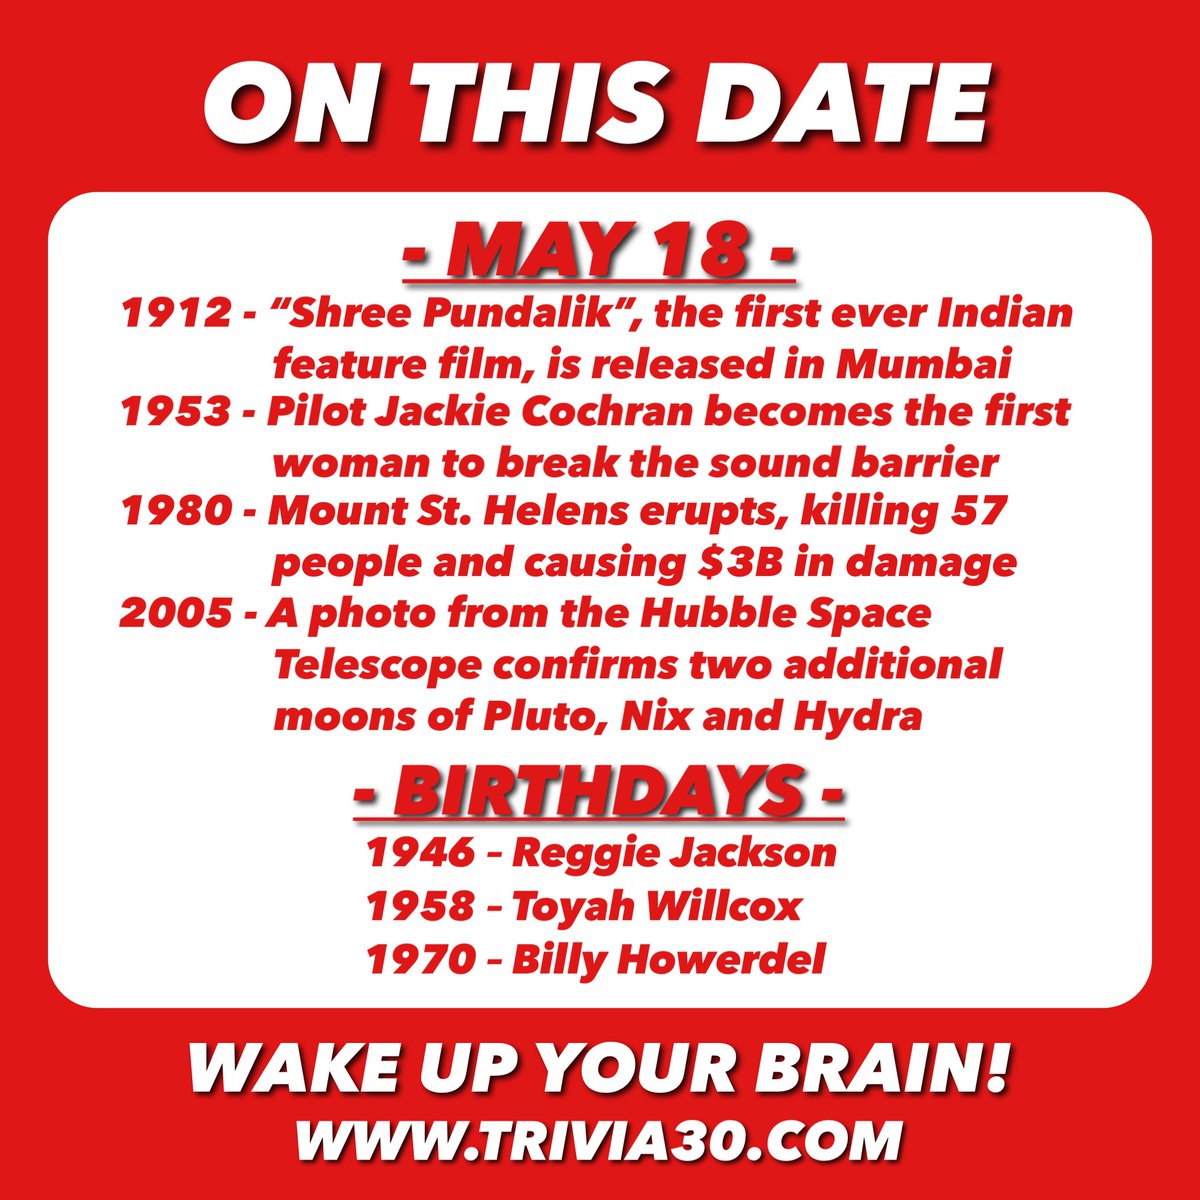 Here's your OTD trivia for 5/18... Have a great Saturday and we will see you all soon! #trivia30 #wakeupyourbrain #Mumbai #Bollywood #HERstory #MountSaintHelens #volcano #Hubble #Pluto #ReggieJackson #ToyahWillcox #BillyHowerdel #APerfectCircle